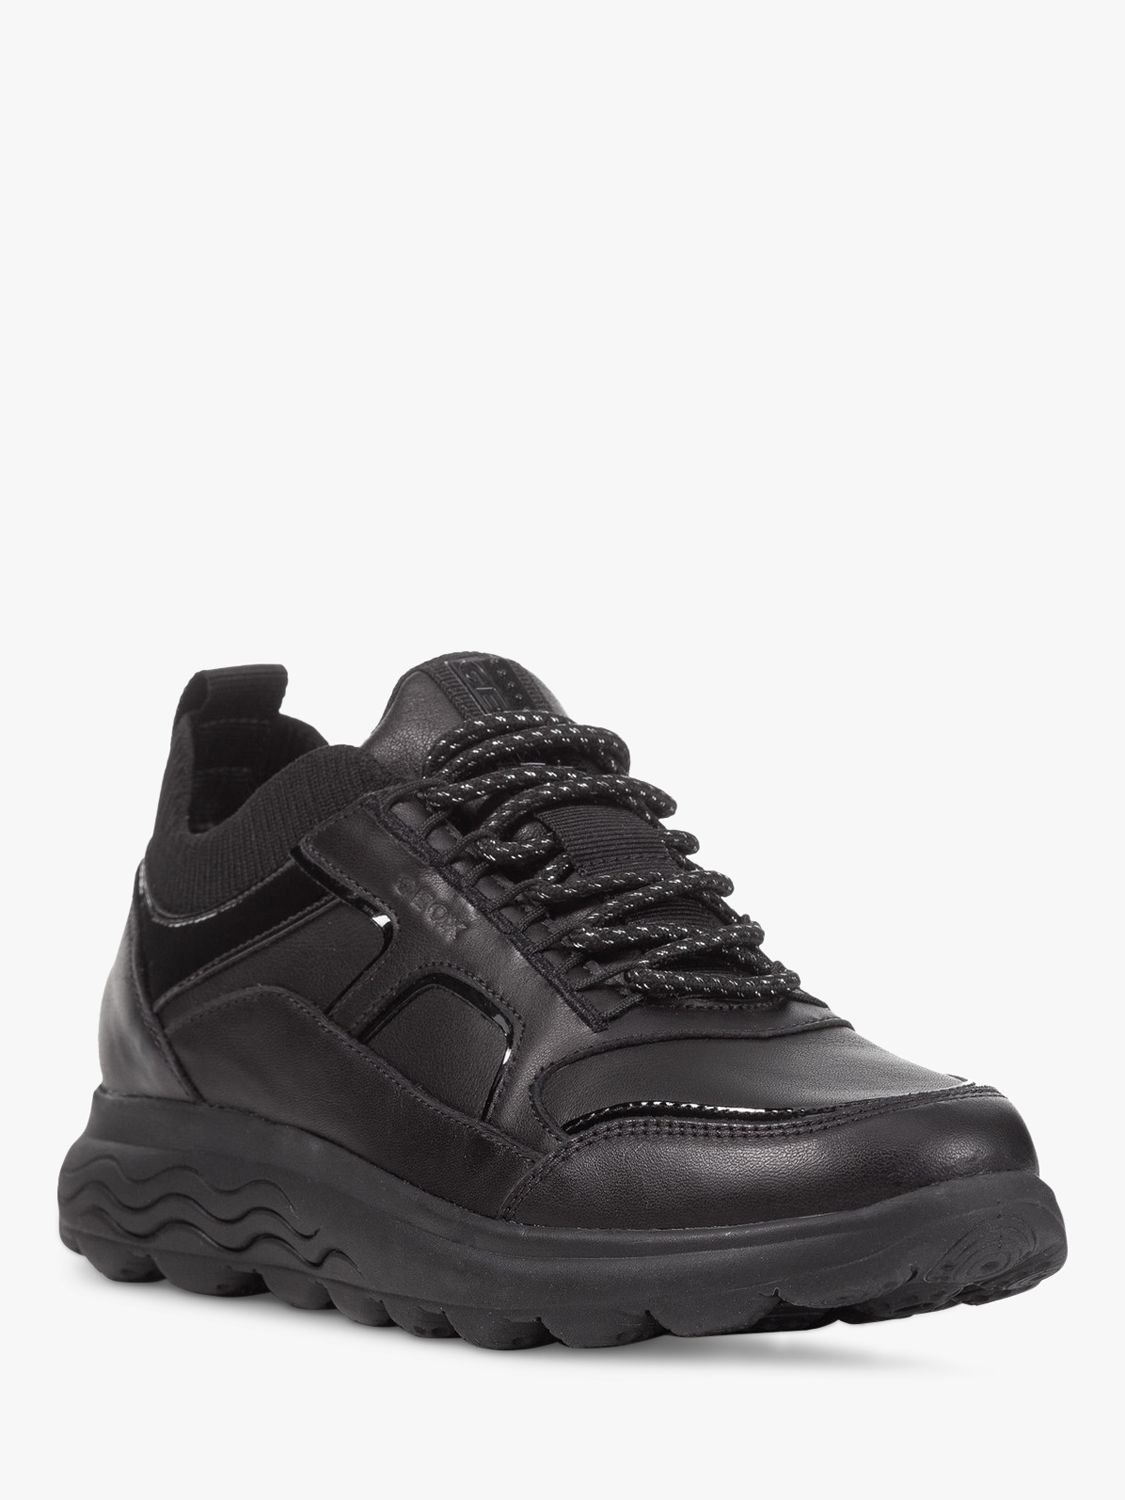 Geox Women's Spherica Wide Fit Lace Up Trainers, Black at John Lewis ...